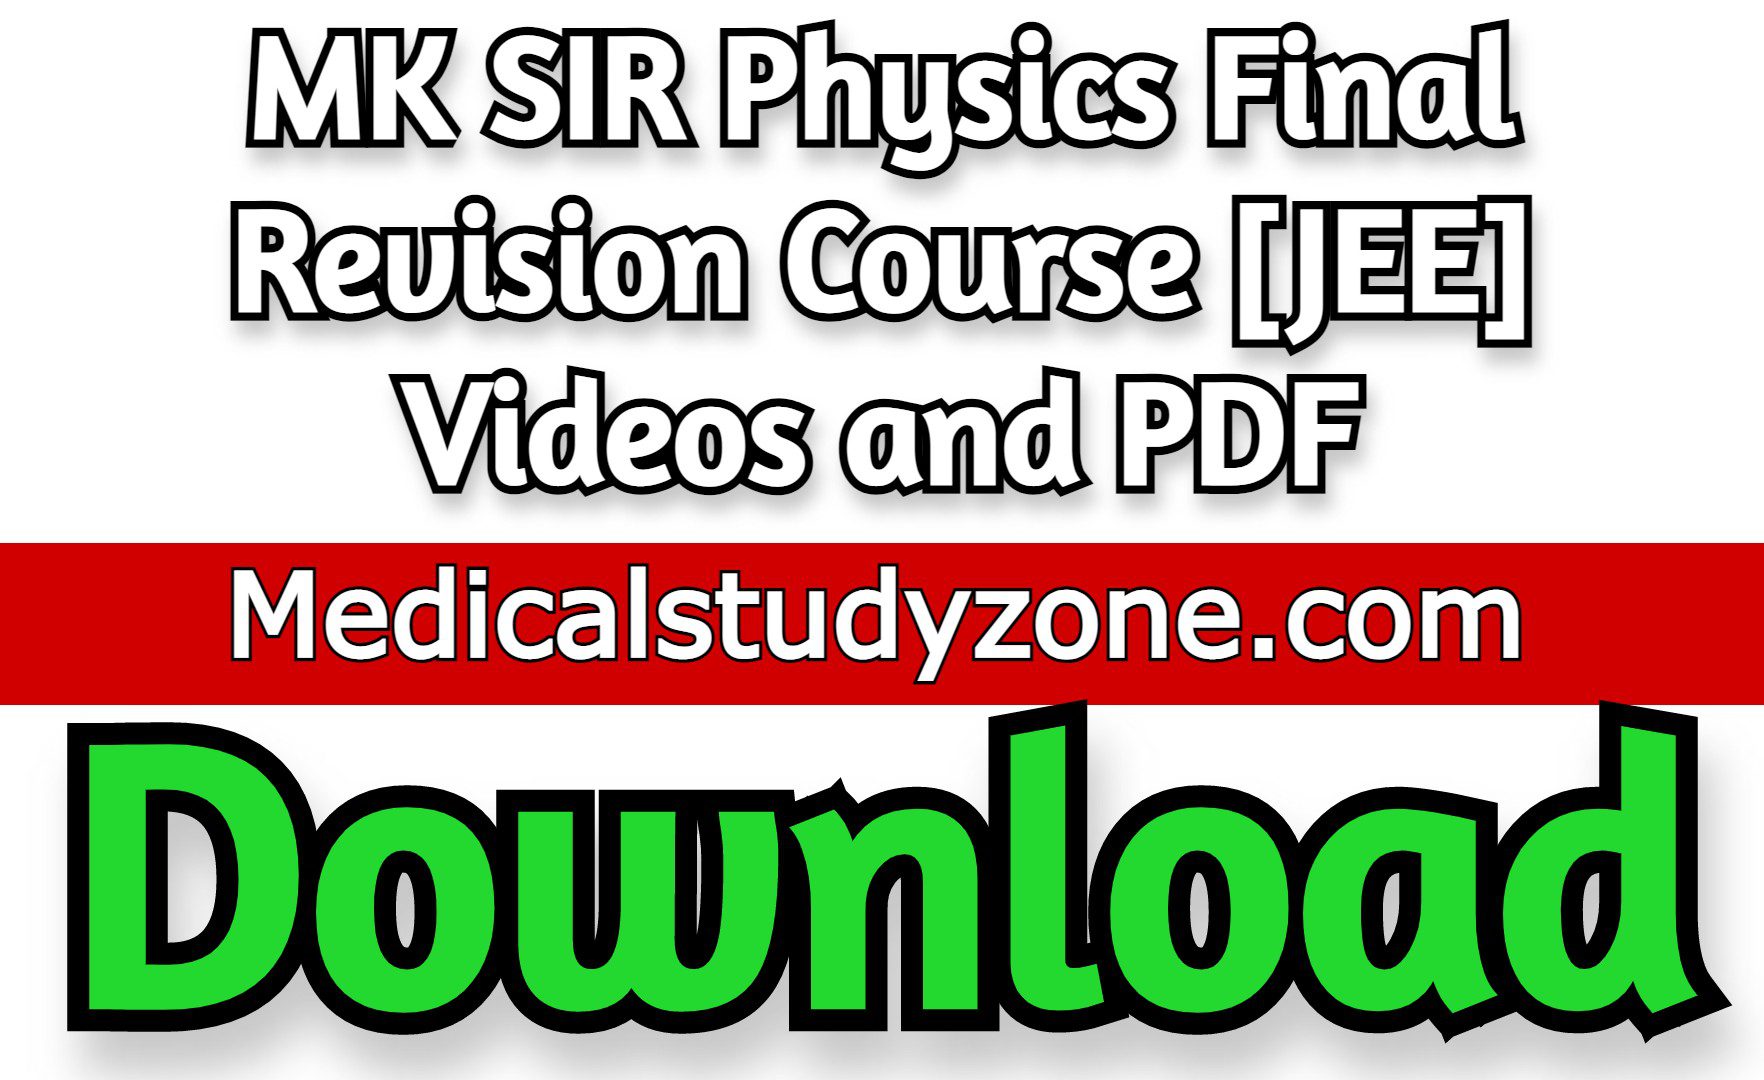 MK SIR Physics Final Revision Course [JEE] Videos and PDF Free Download